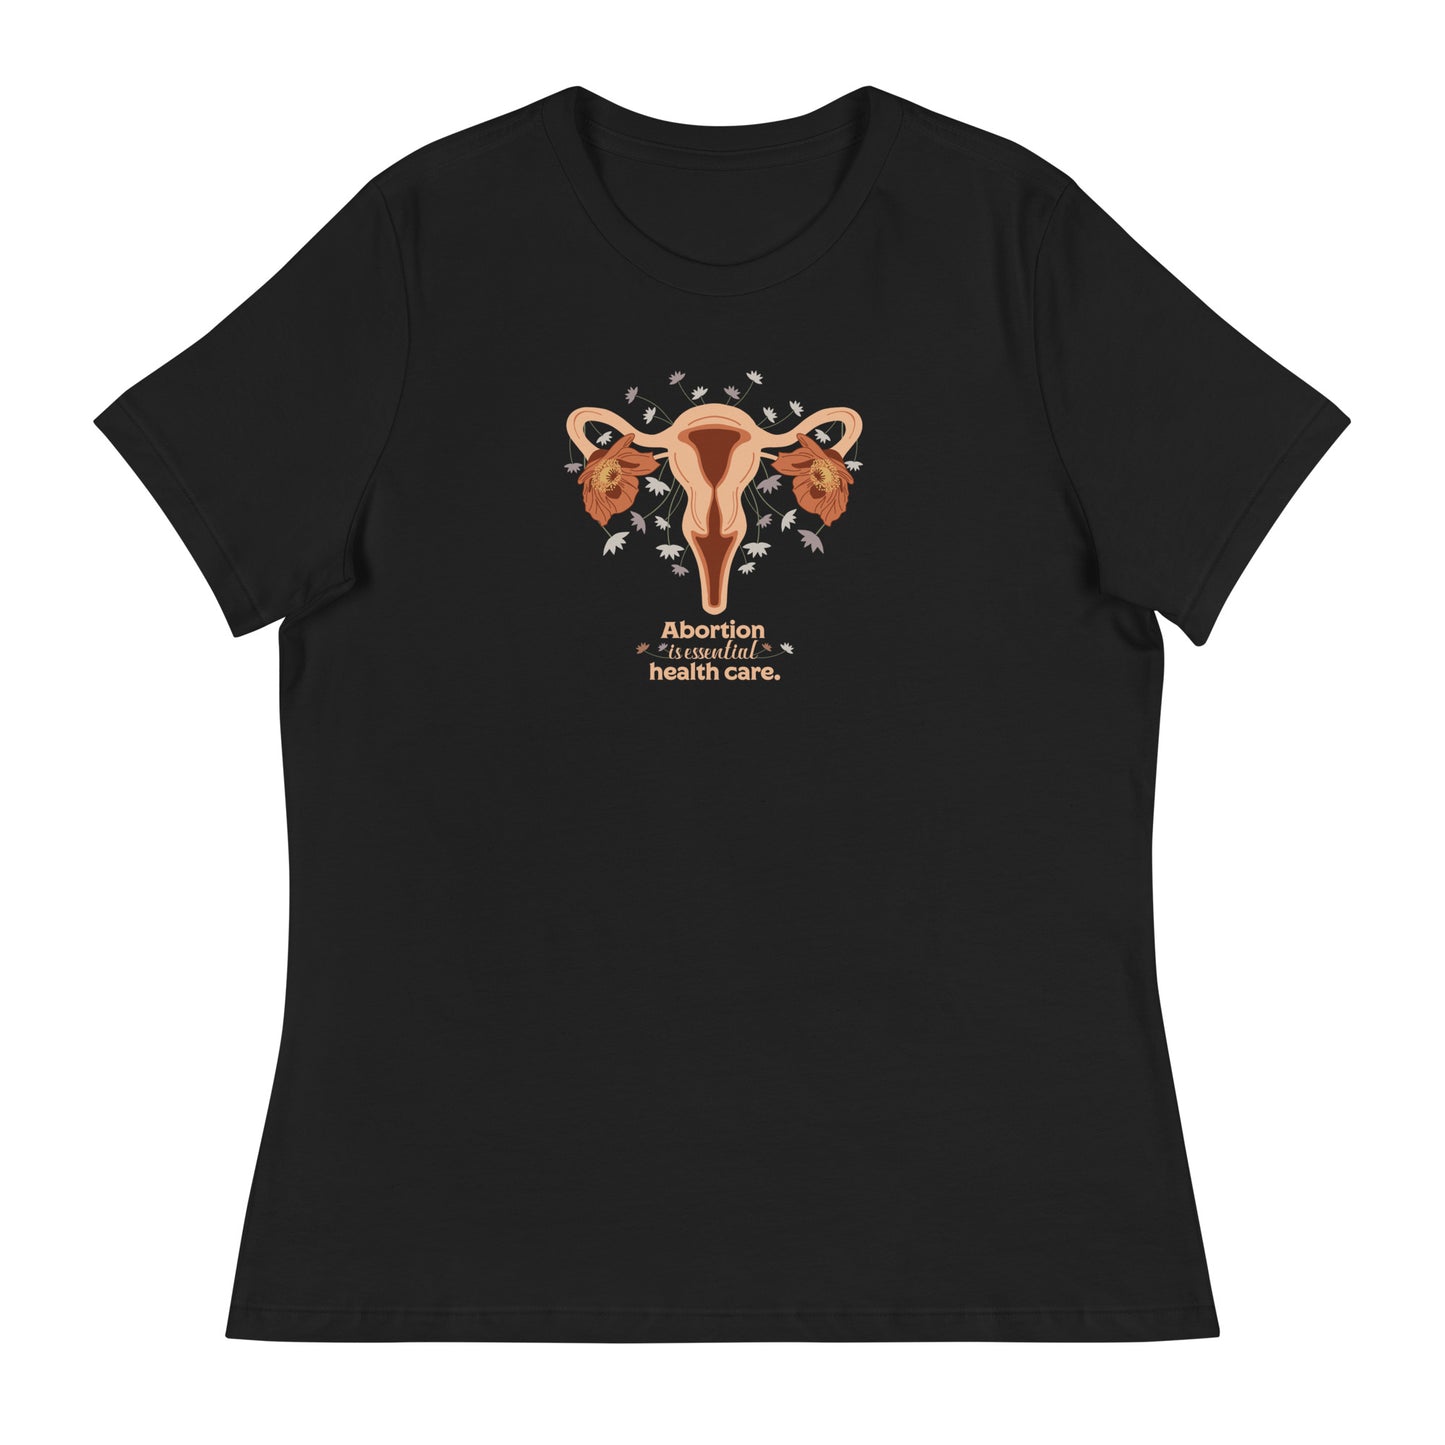 Abortion is Essential Health Care - Relaxed Women's Tee